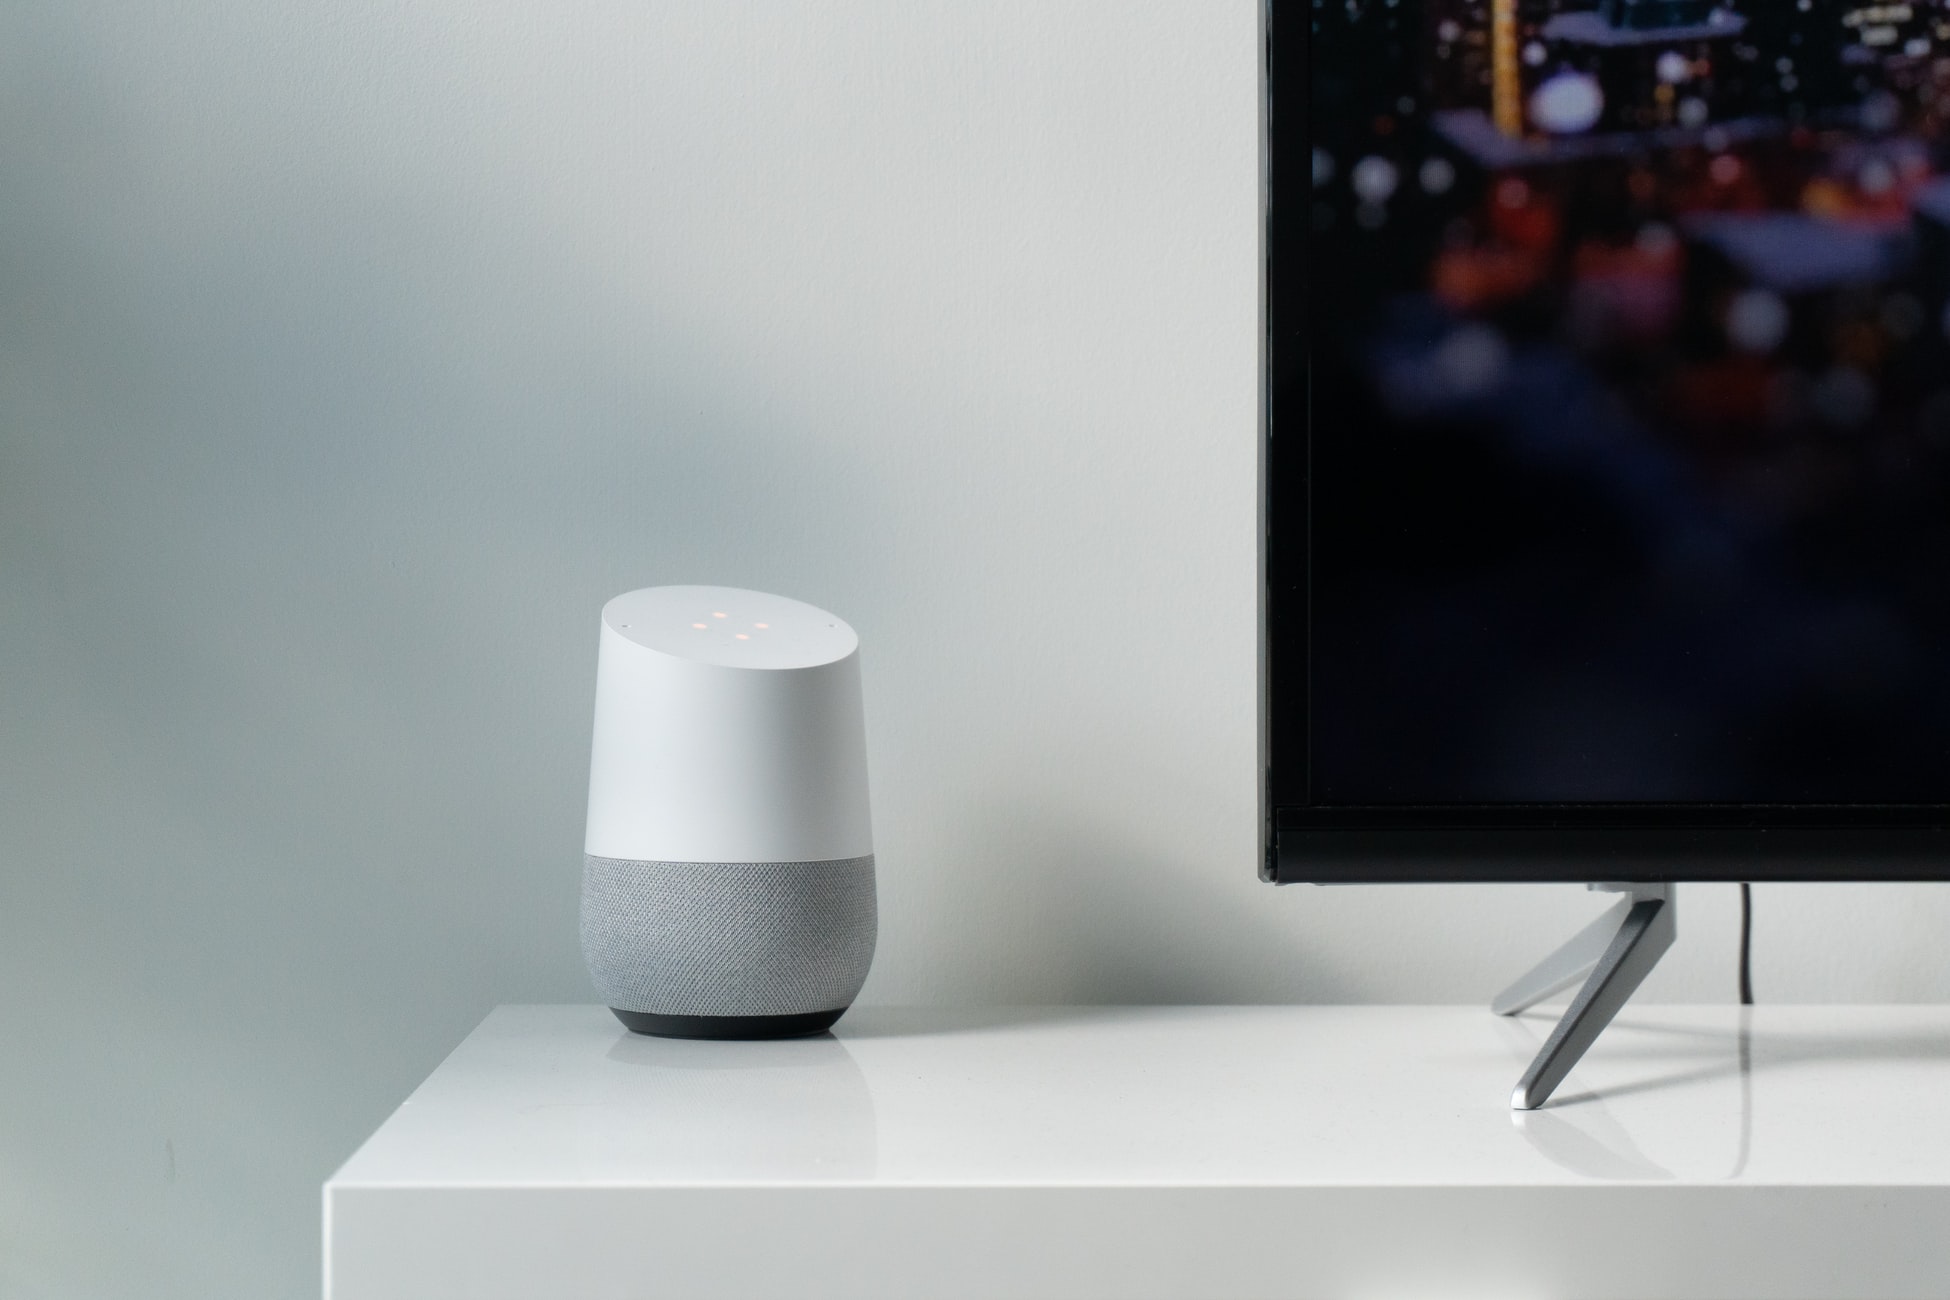 How To Use Google Home As TV Speaker